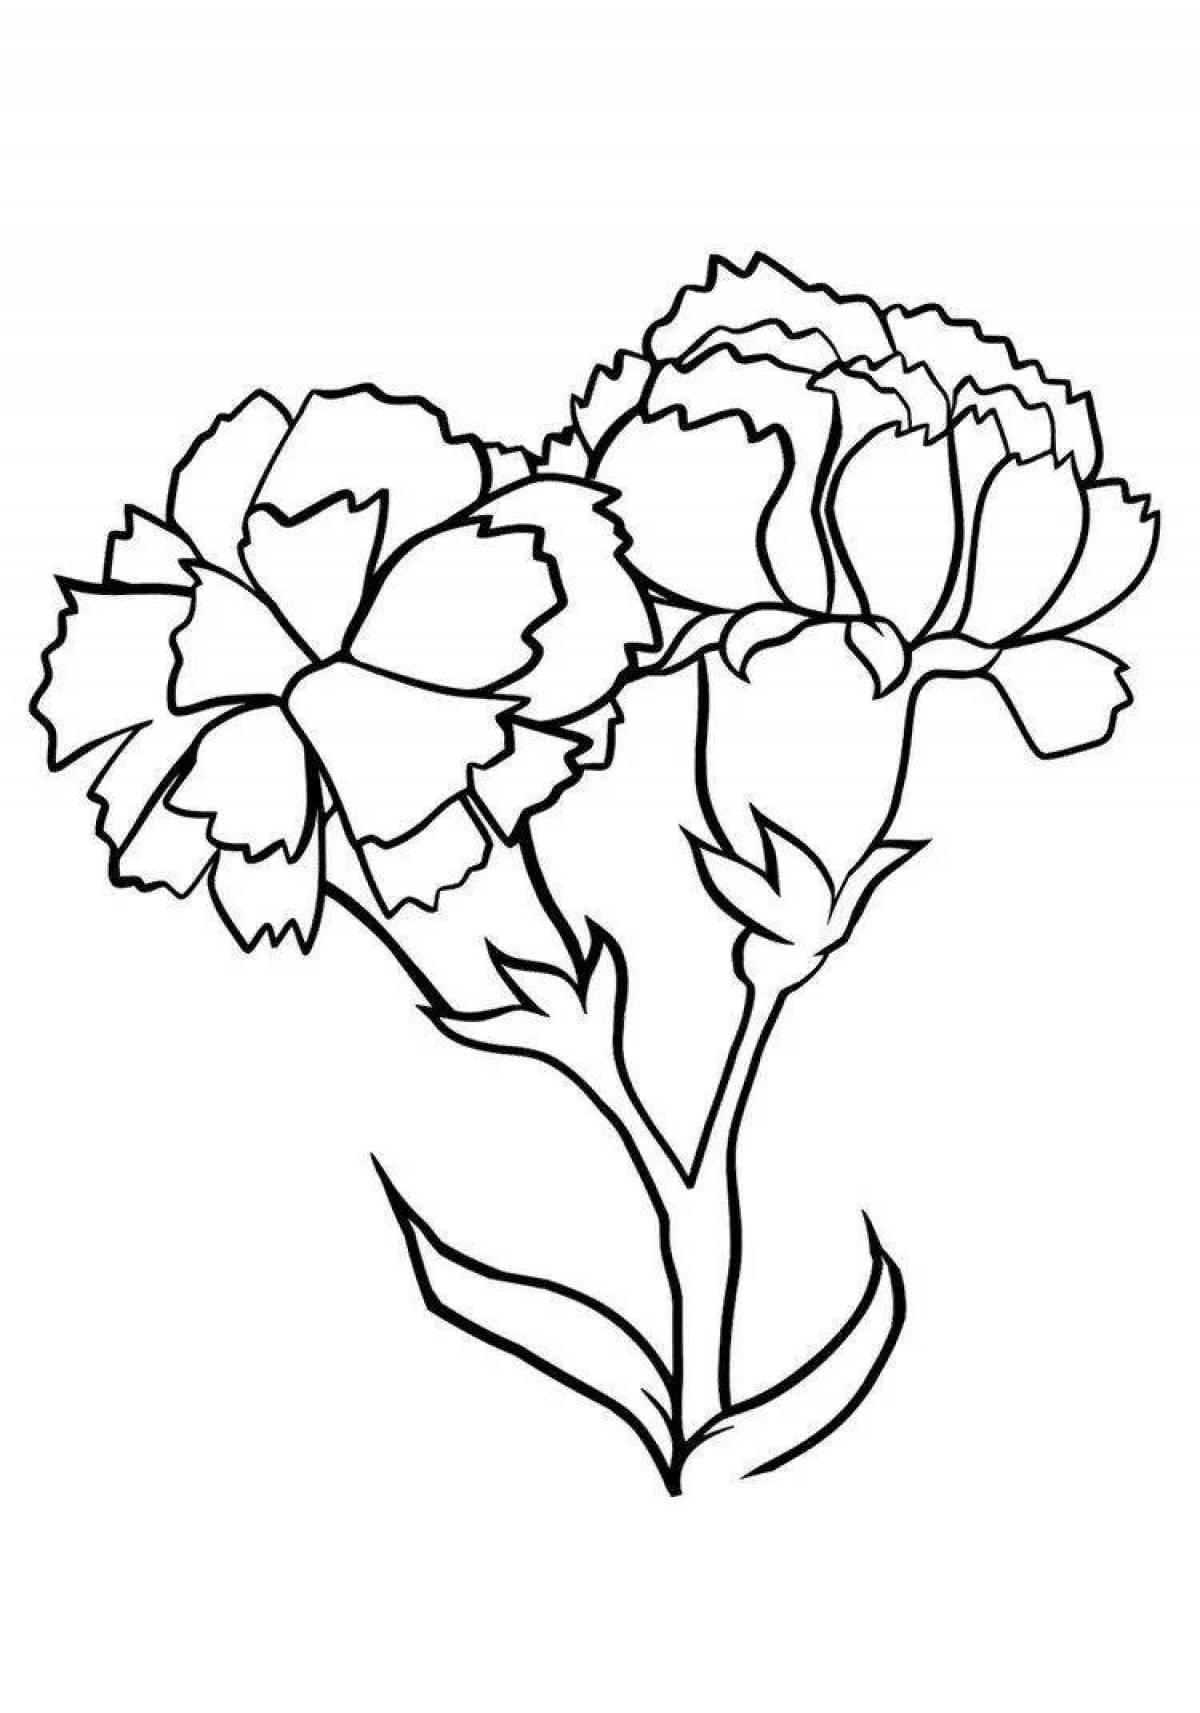 Sublime carnations coloring book